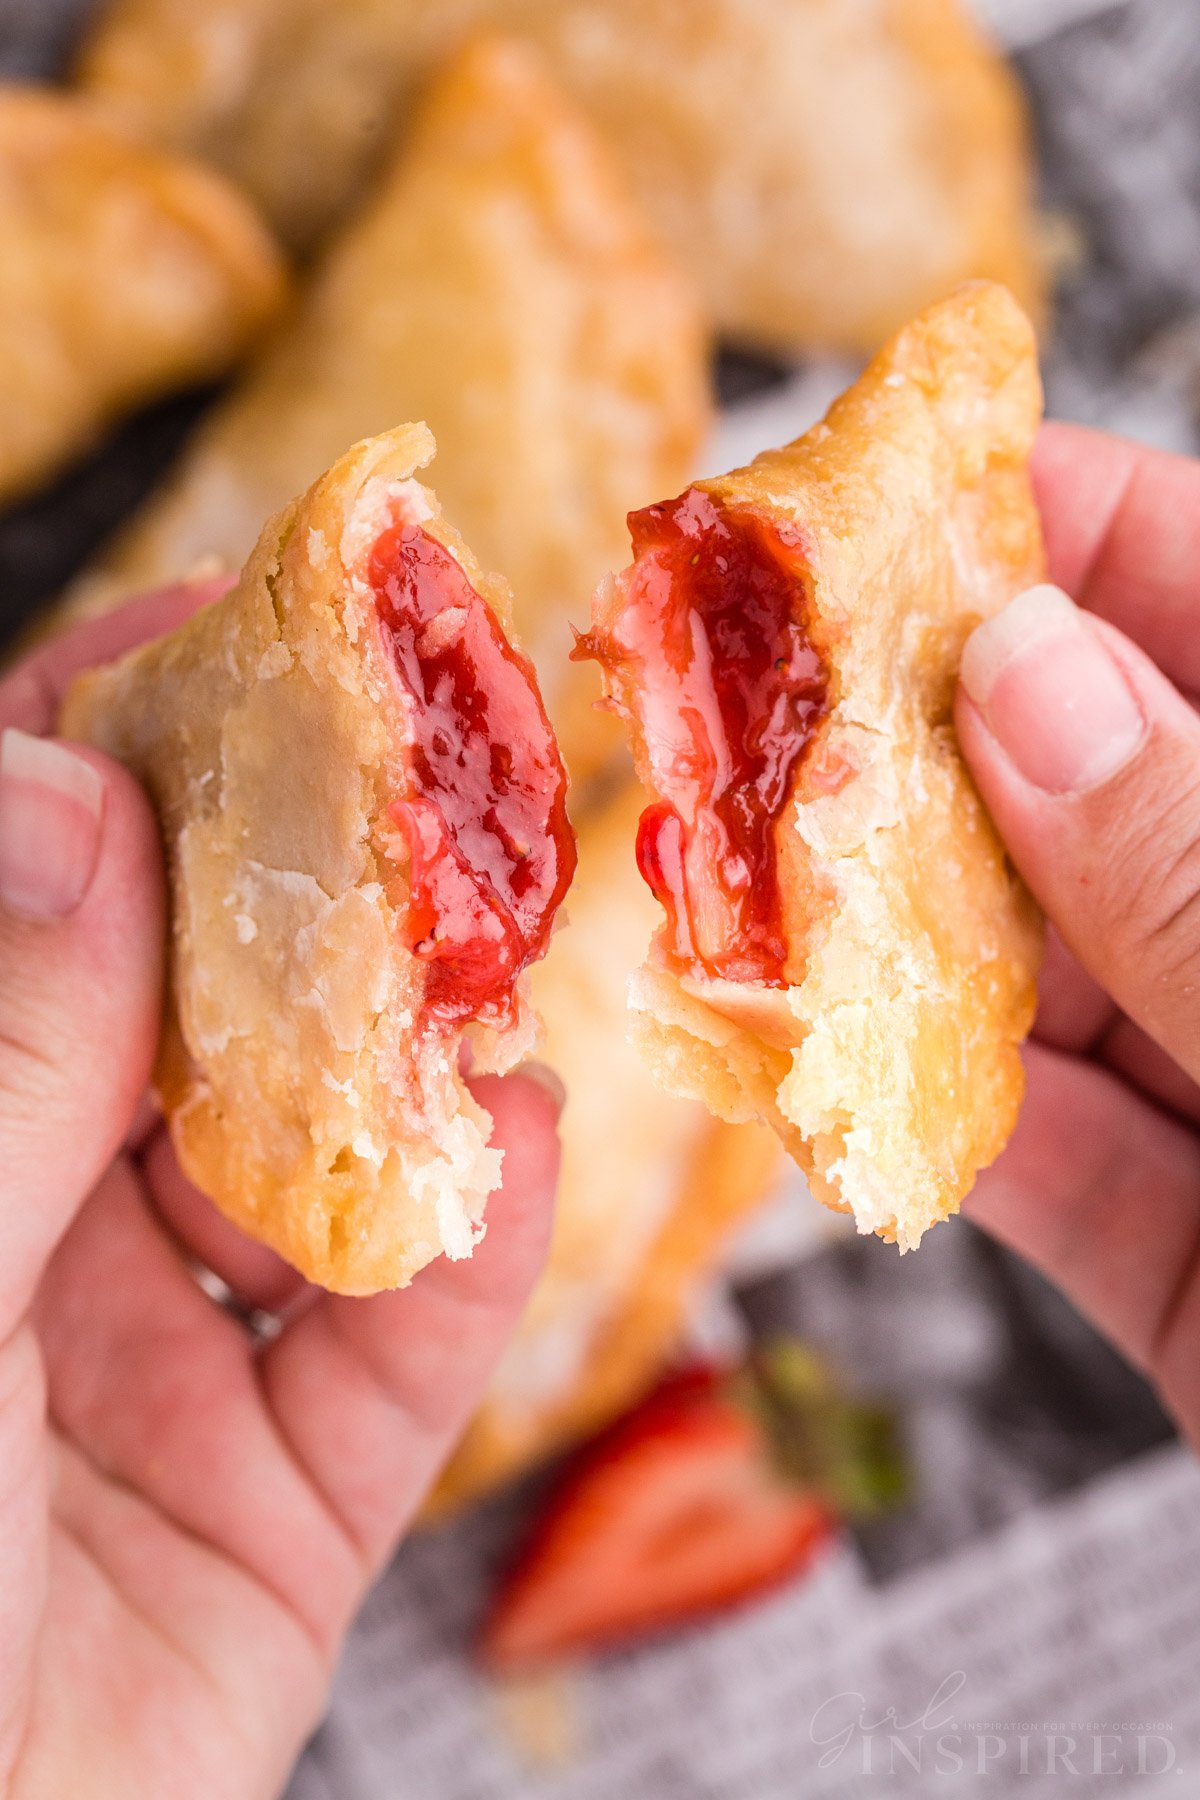 Holding two halves of a strawberry rhubarb hand pie broken open.